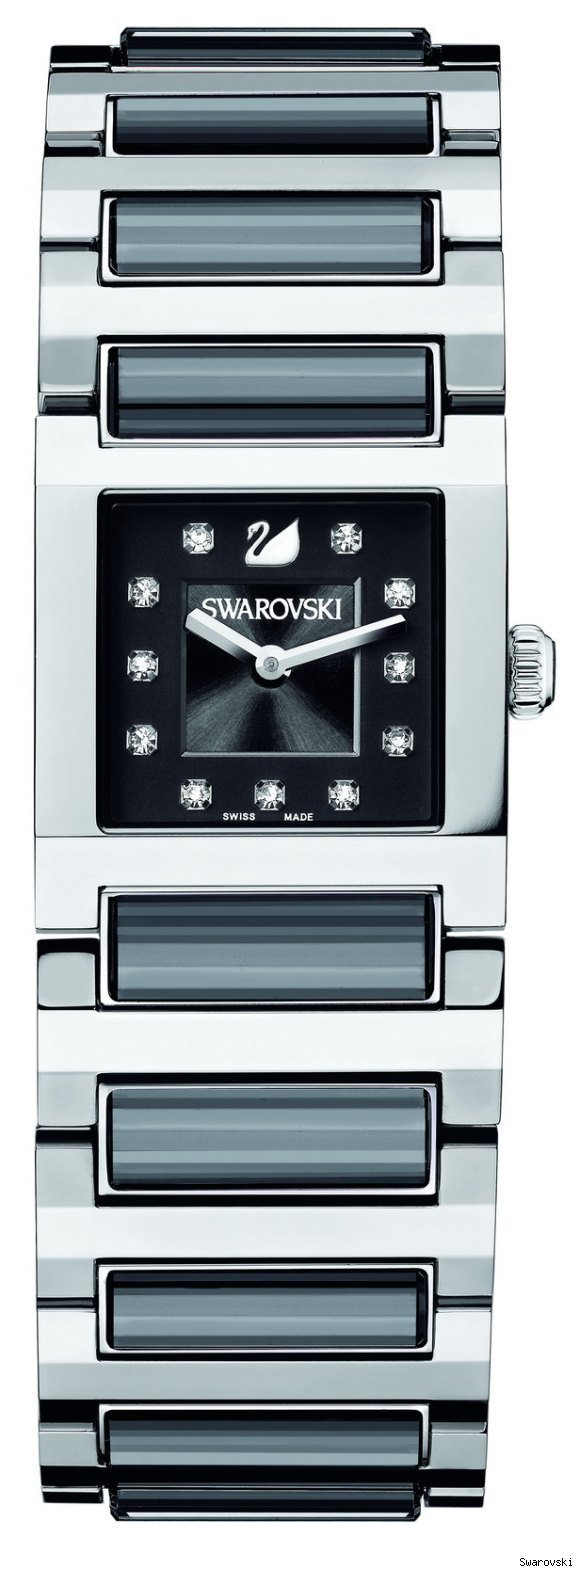 The New Swarovski Watch Collection 2010 Has Arrived